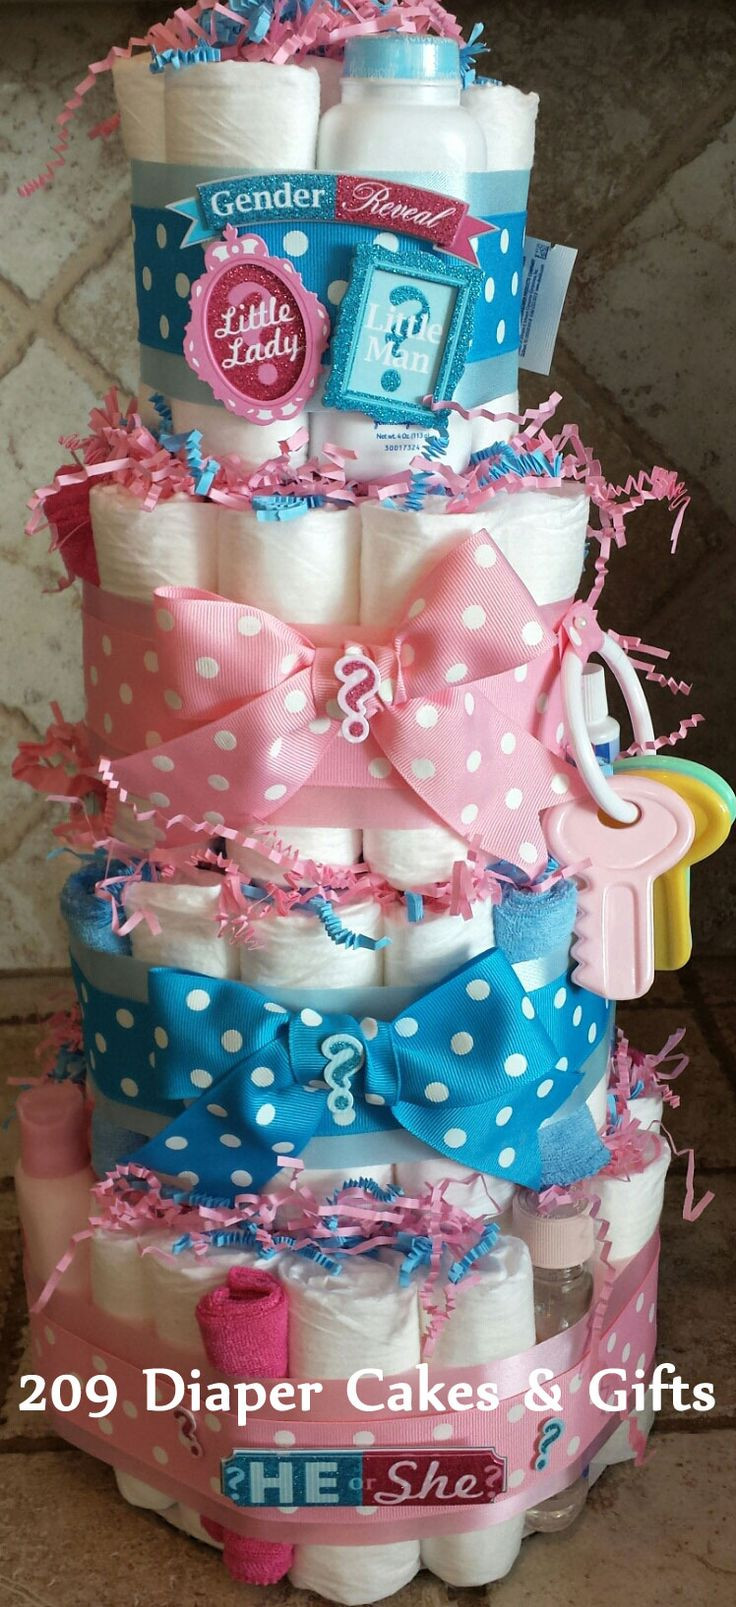 Baby Reveal Party Gifts
 4 Tier Pink & Blue Gender Reveal Diaper Cake by 209 Diaper